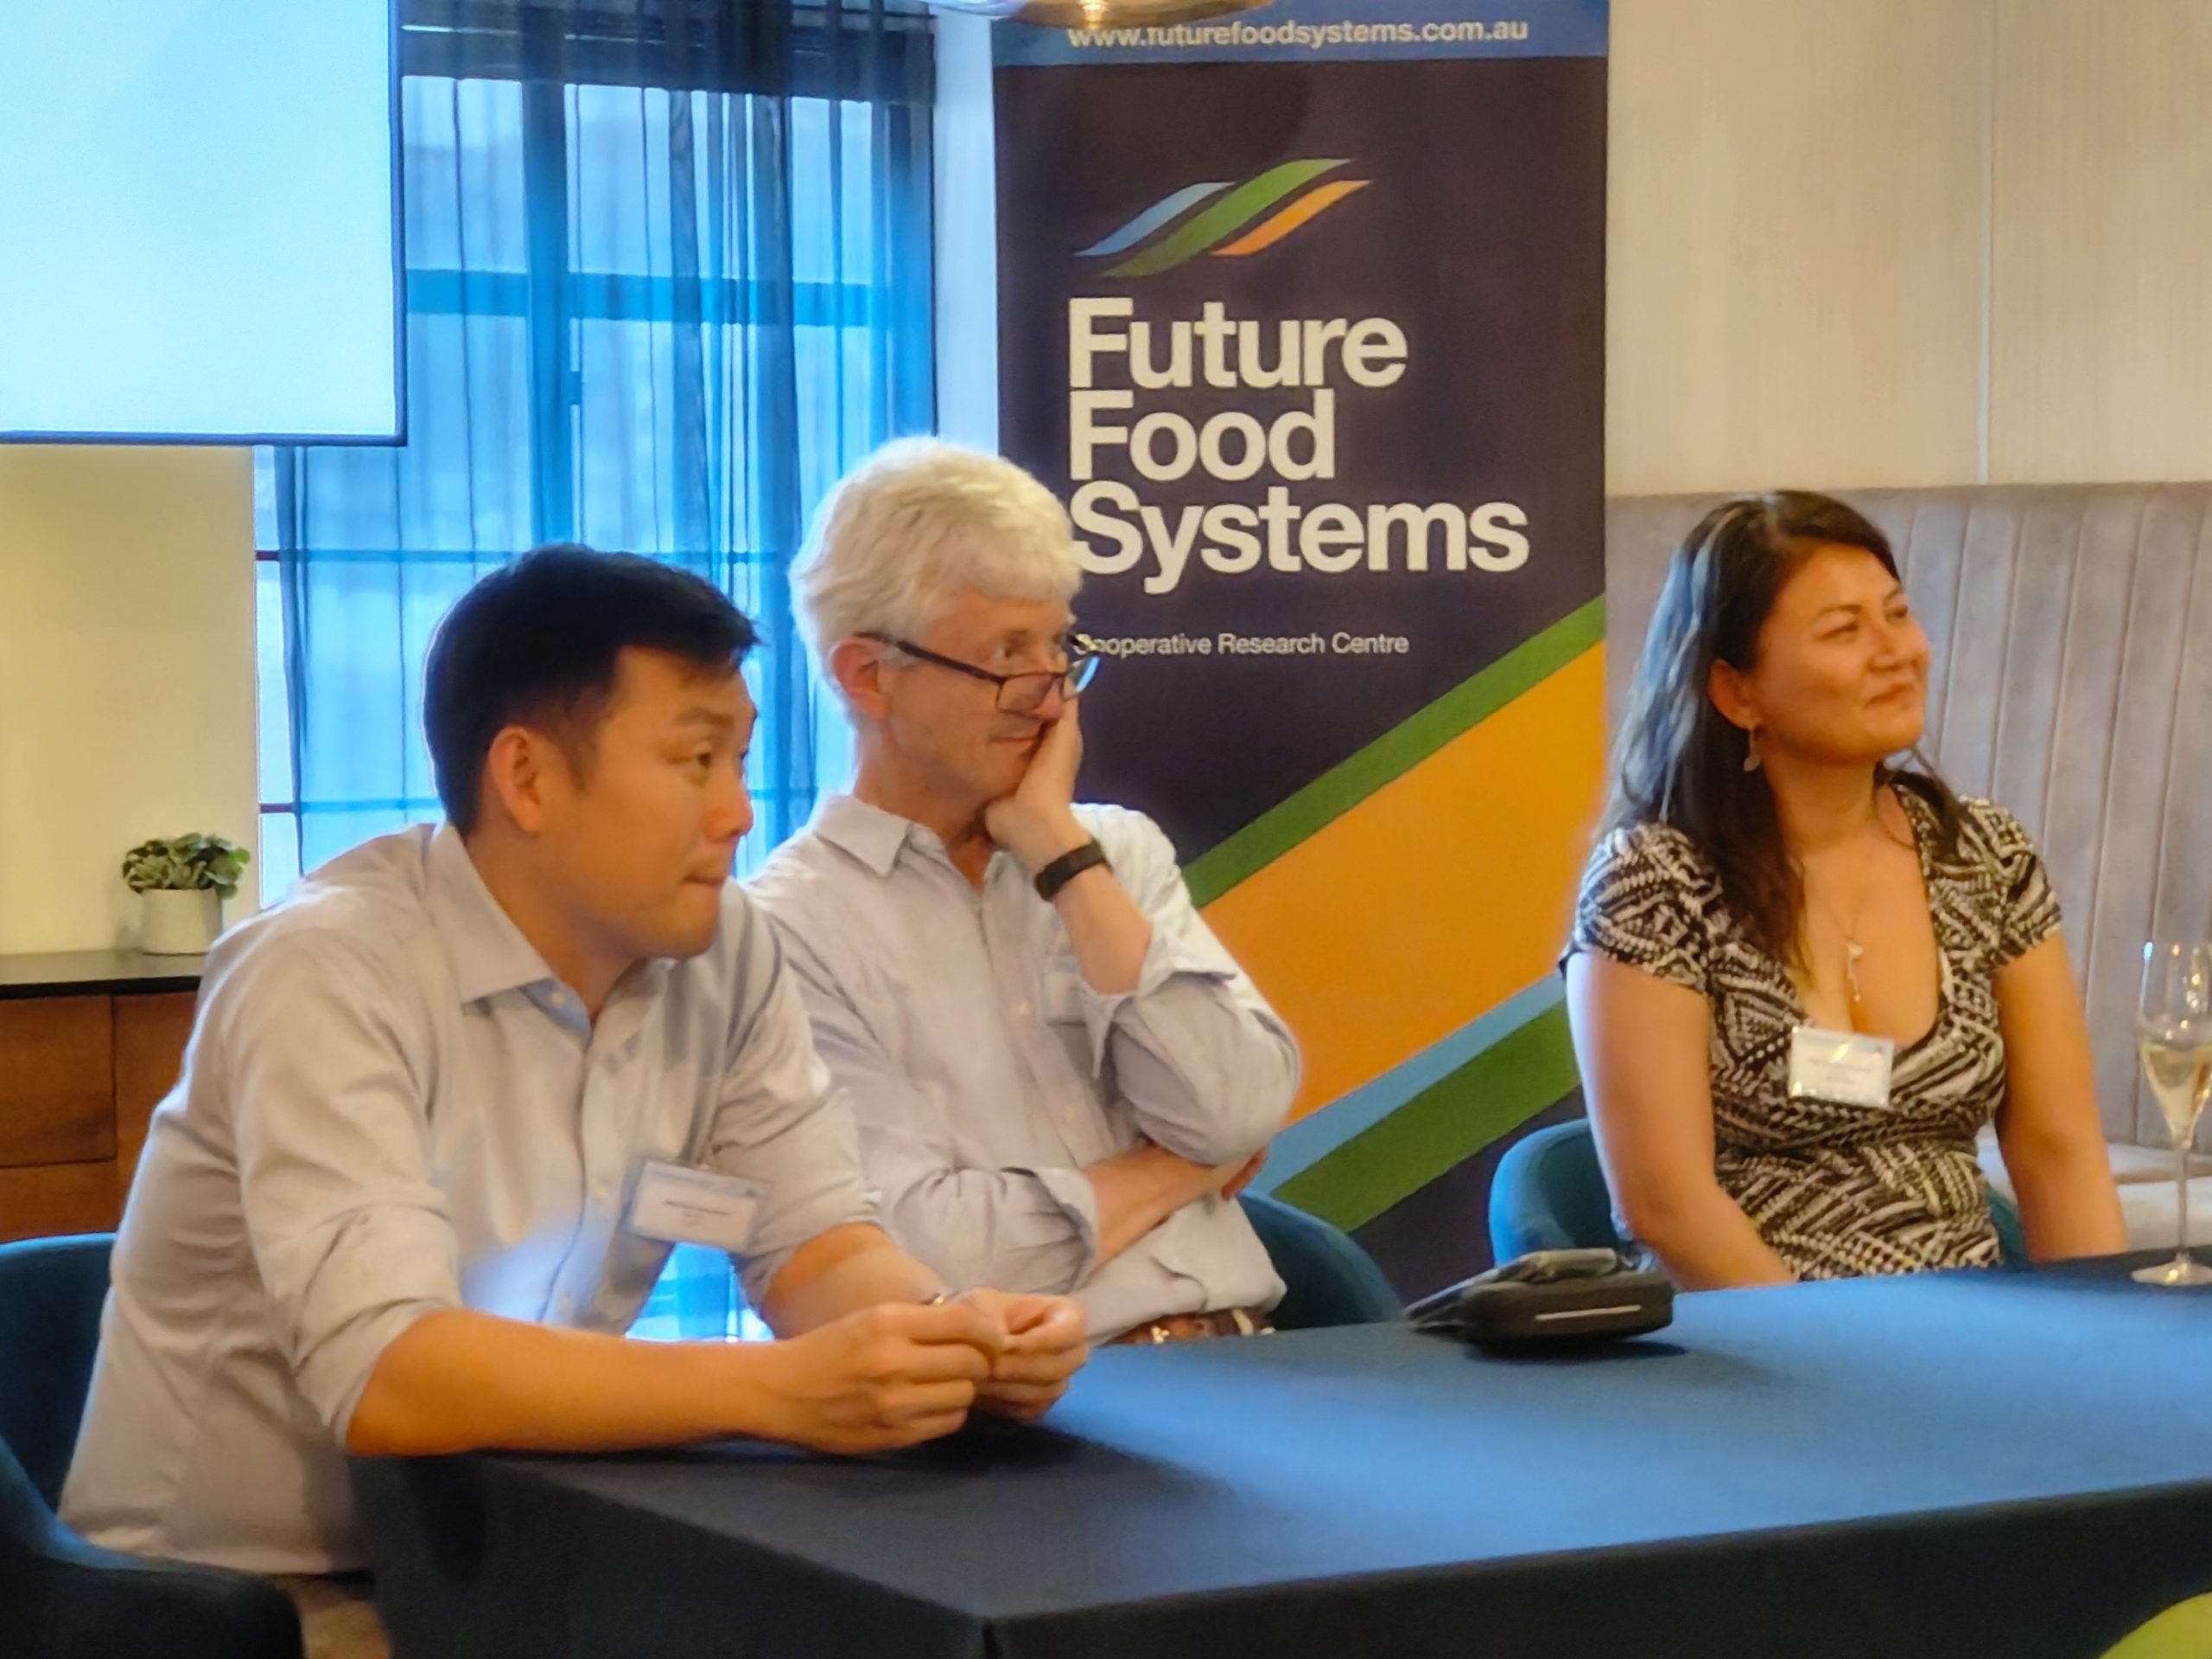 Five Future Food Systems-backed PhD students pitched their research to a 'Shark Tank'-style panel of experts at the annual Networking Night. Which was the most convincing?